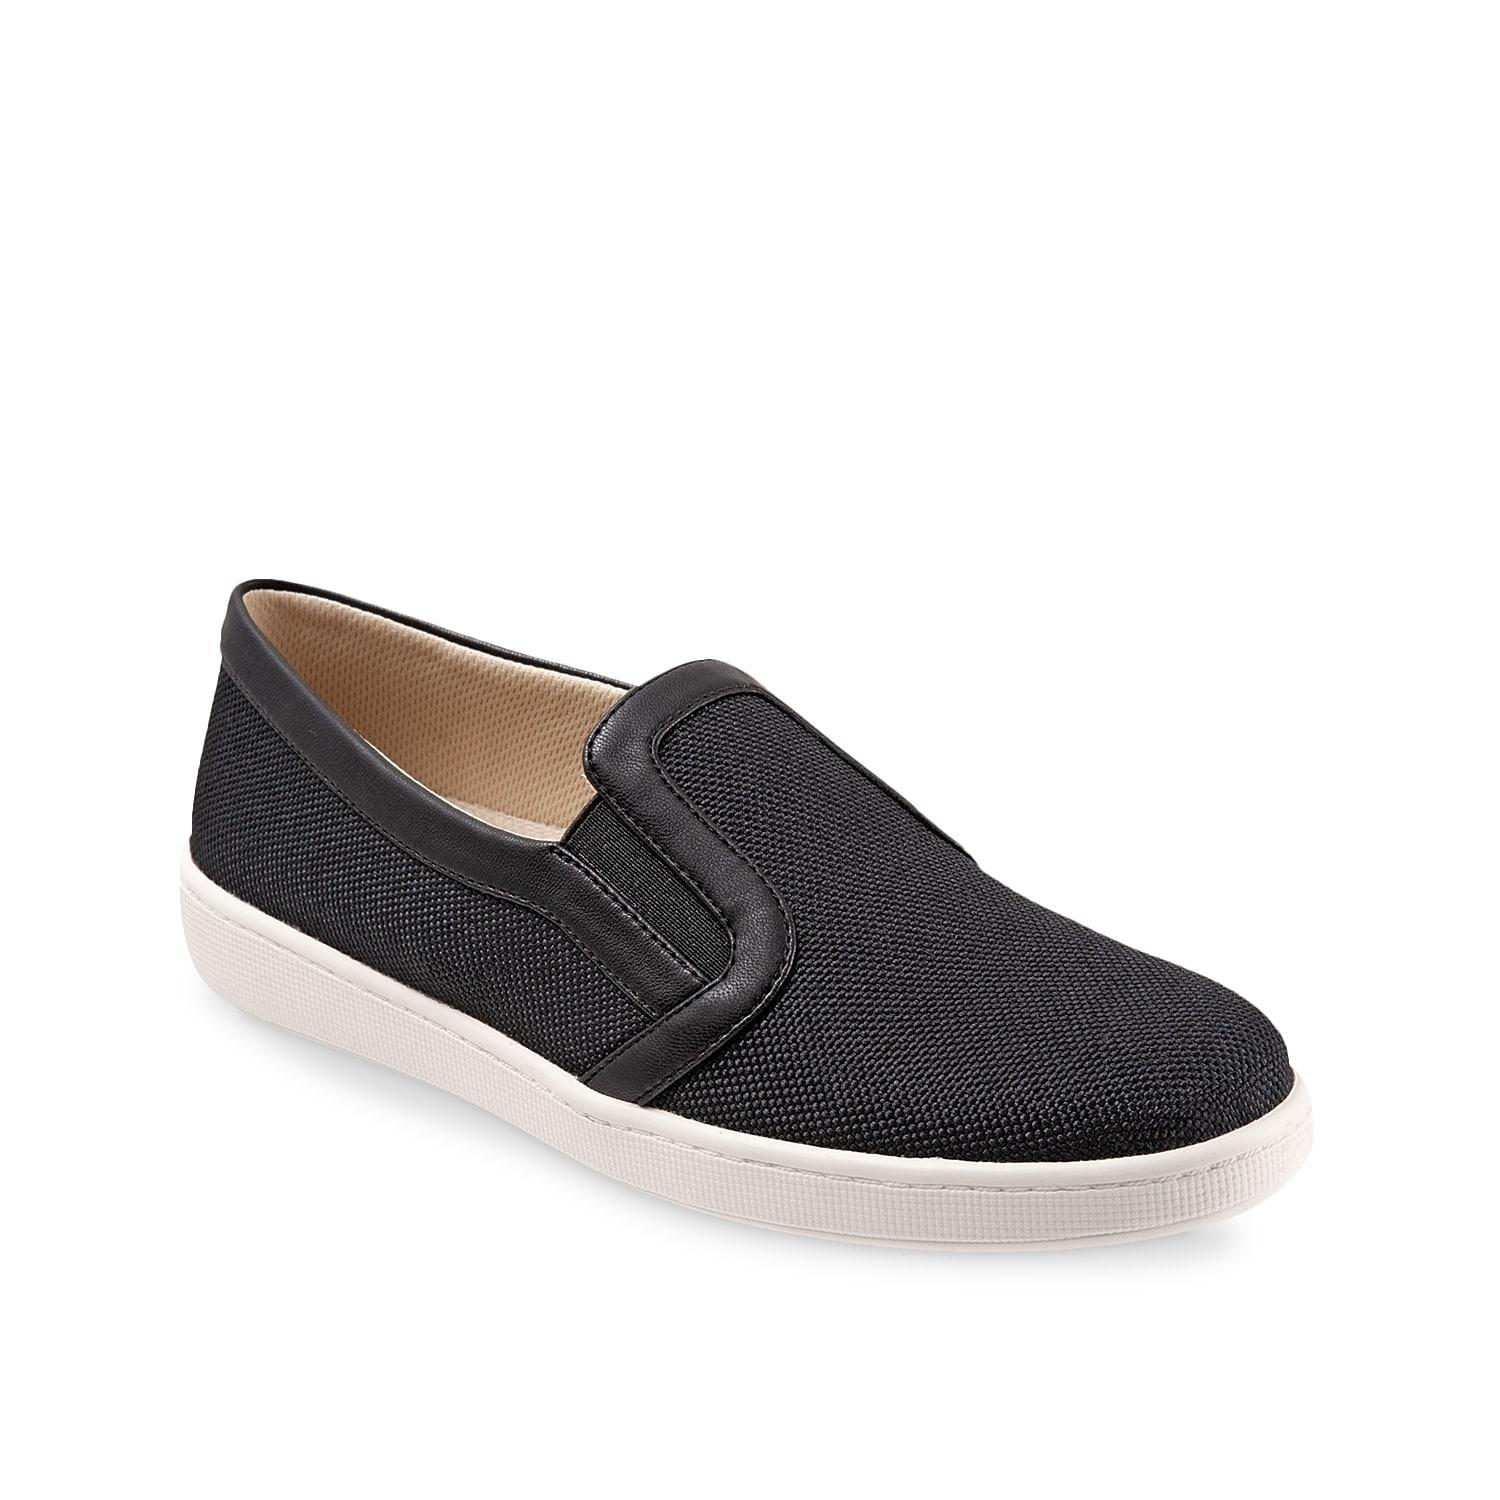 Trotters Alright Slip-On Sneaker Product Image